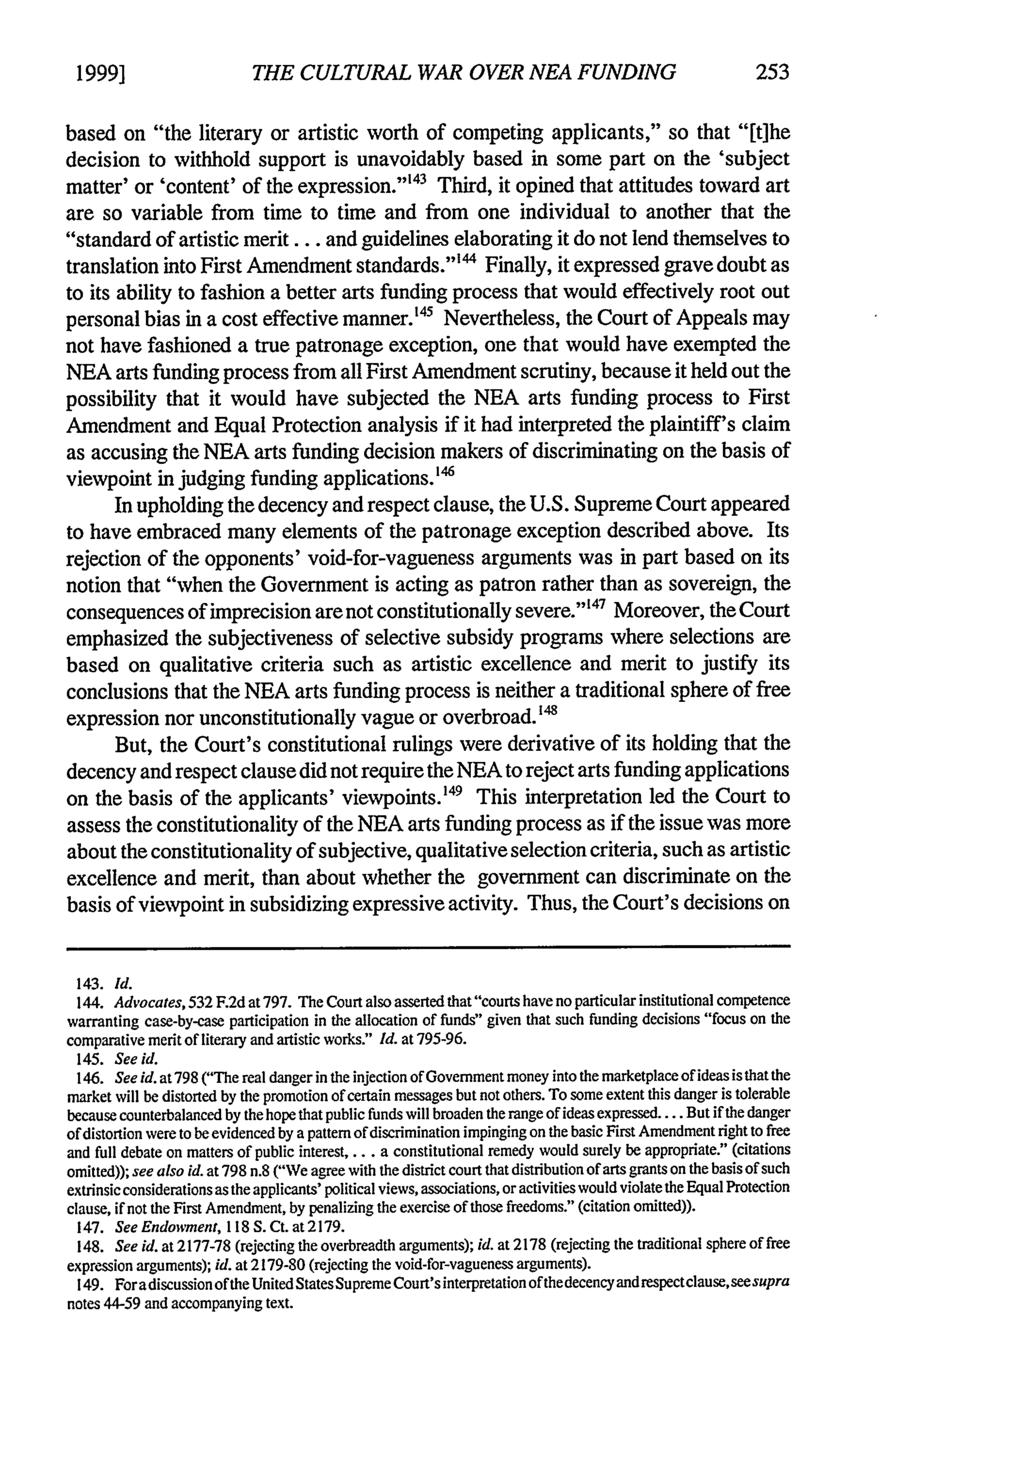 1999] Allison: The Cultural War over NEA Funding: Illogical Statutory Deconstruc THE CULTURAL WAR OVER NEA FUNDING based on "the literary or artistic worth of competing applicants," so that "[t]he